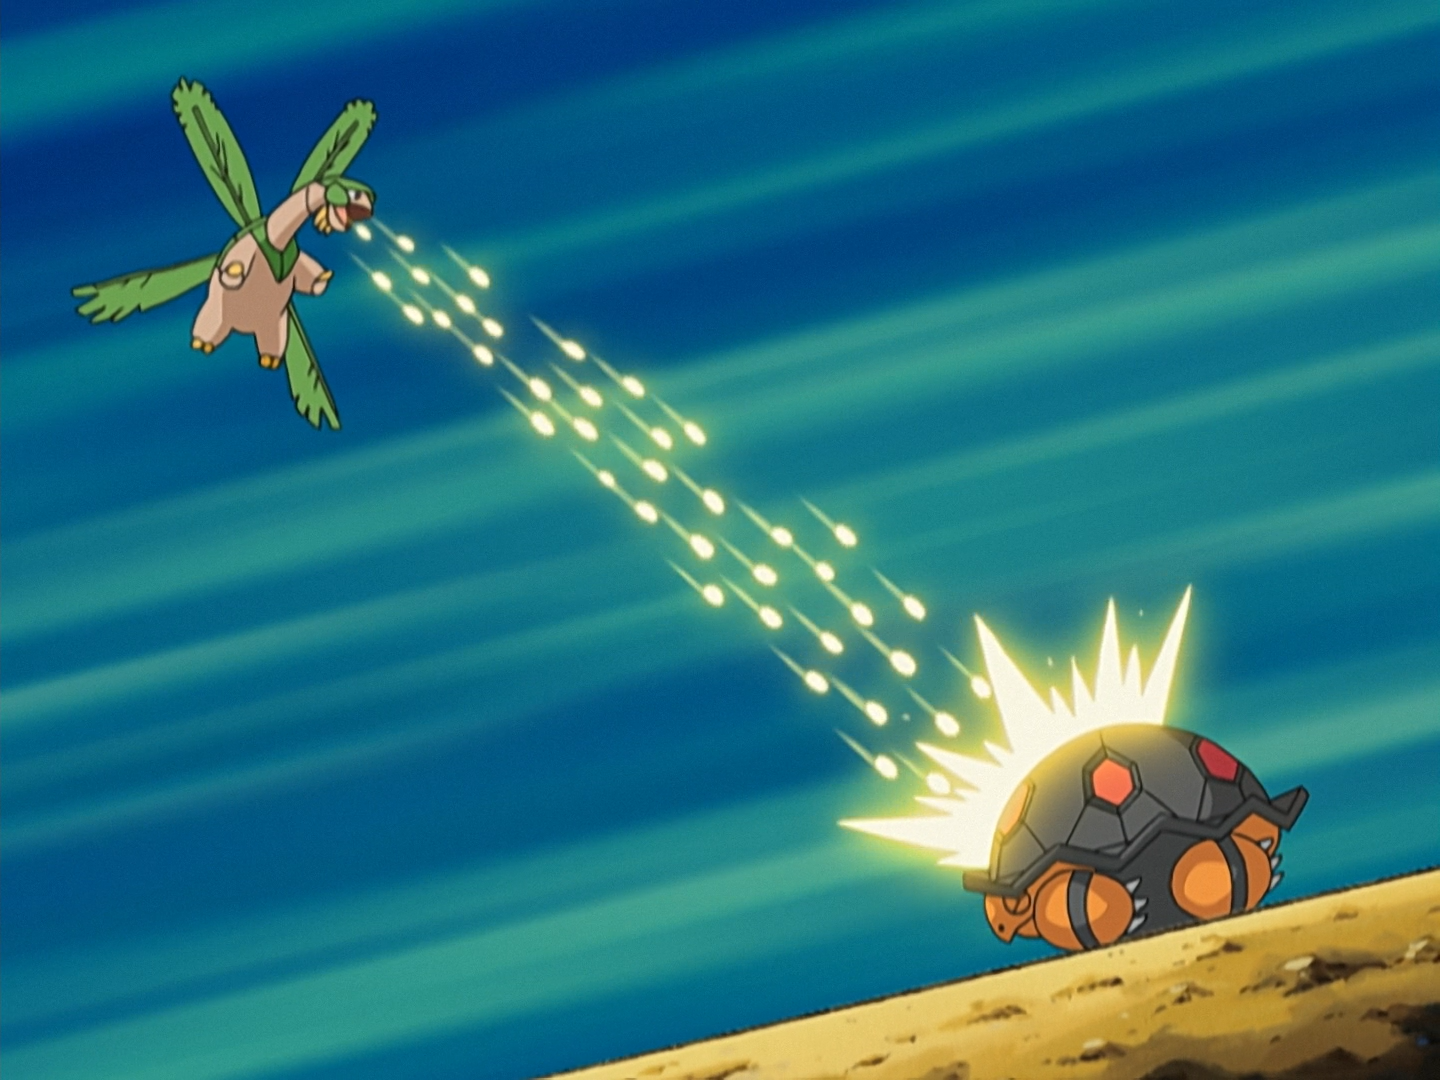 http://vignette3.wikia.nocookie.net/pokemon/images/5/5b/Dominick_Tropius_Bullet_Seed.png/revision/latest?cb=20150214060650